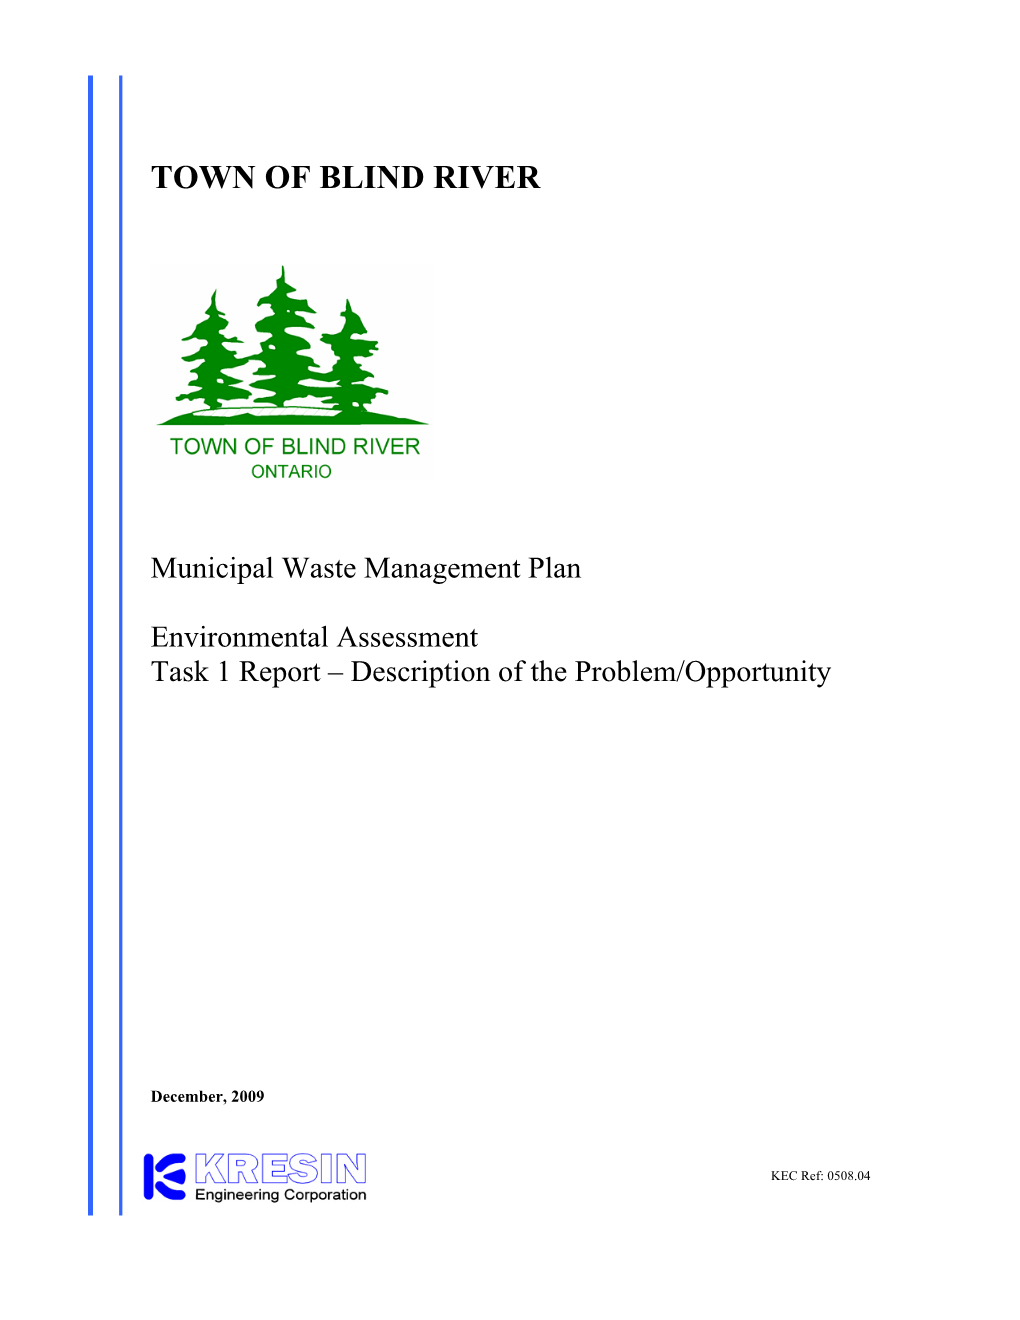 Town of Blind River